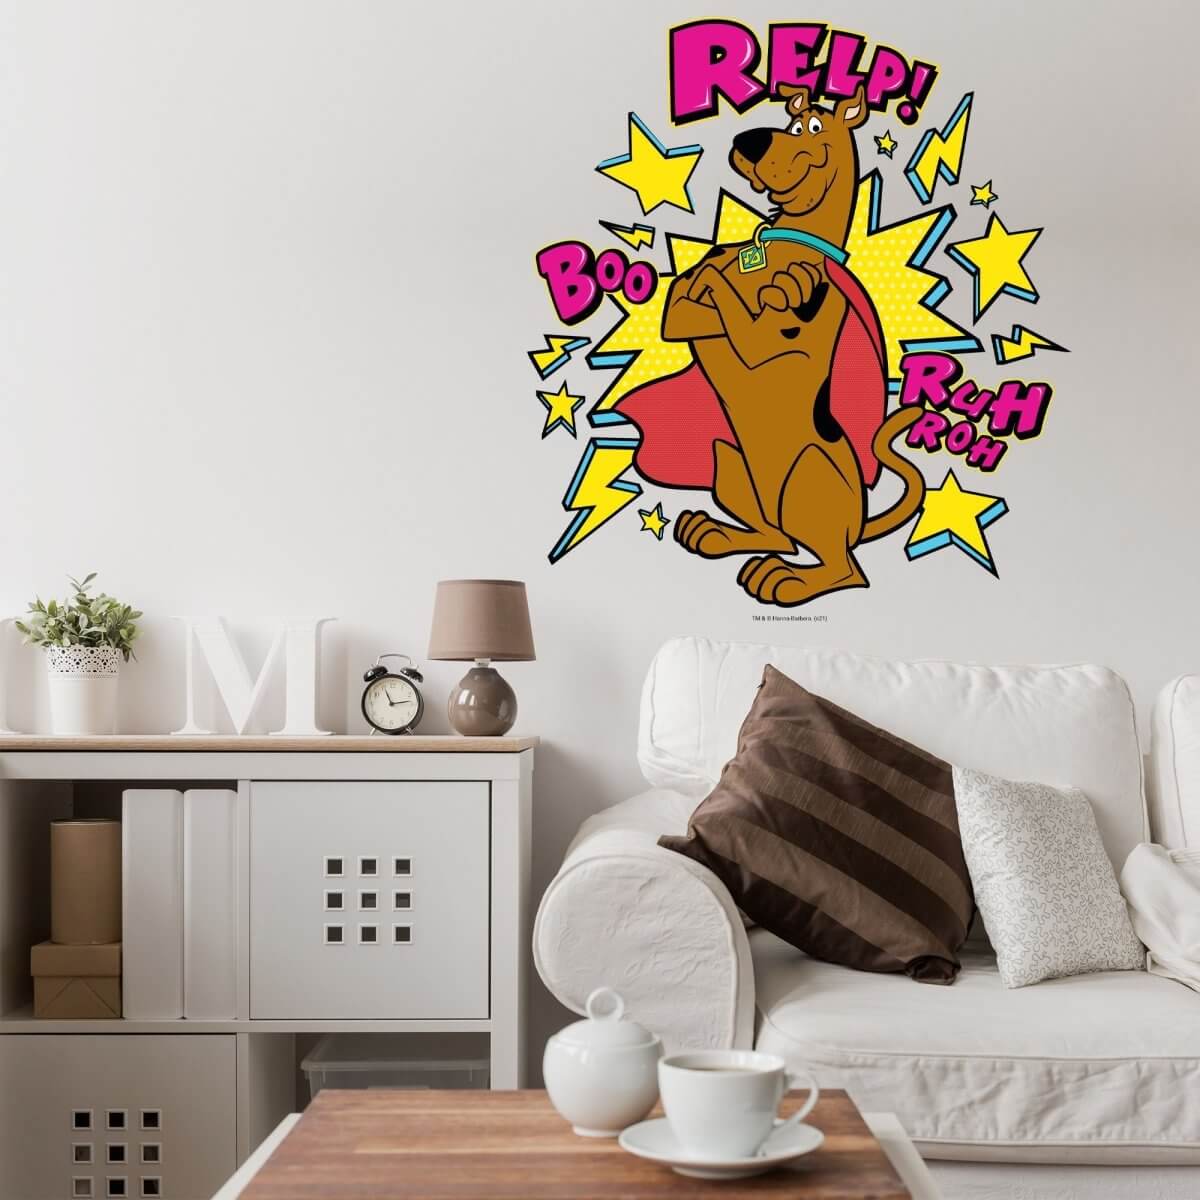 Kismet Decals Home & Room Decor Scooby-Doo to the Rescue Wall decal sticker - officially licensed - latex printed with no solvent odor - Kismet Decals